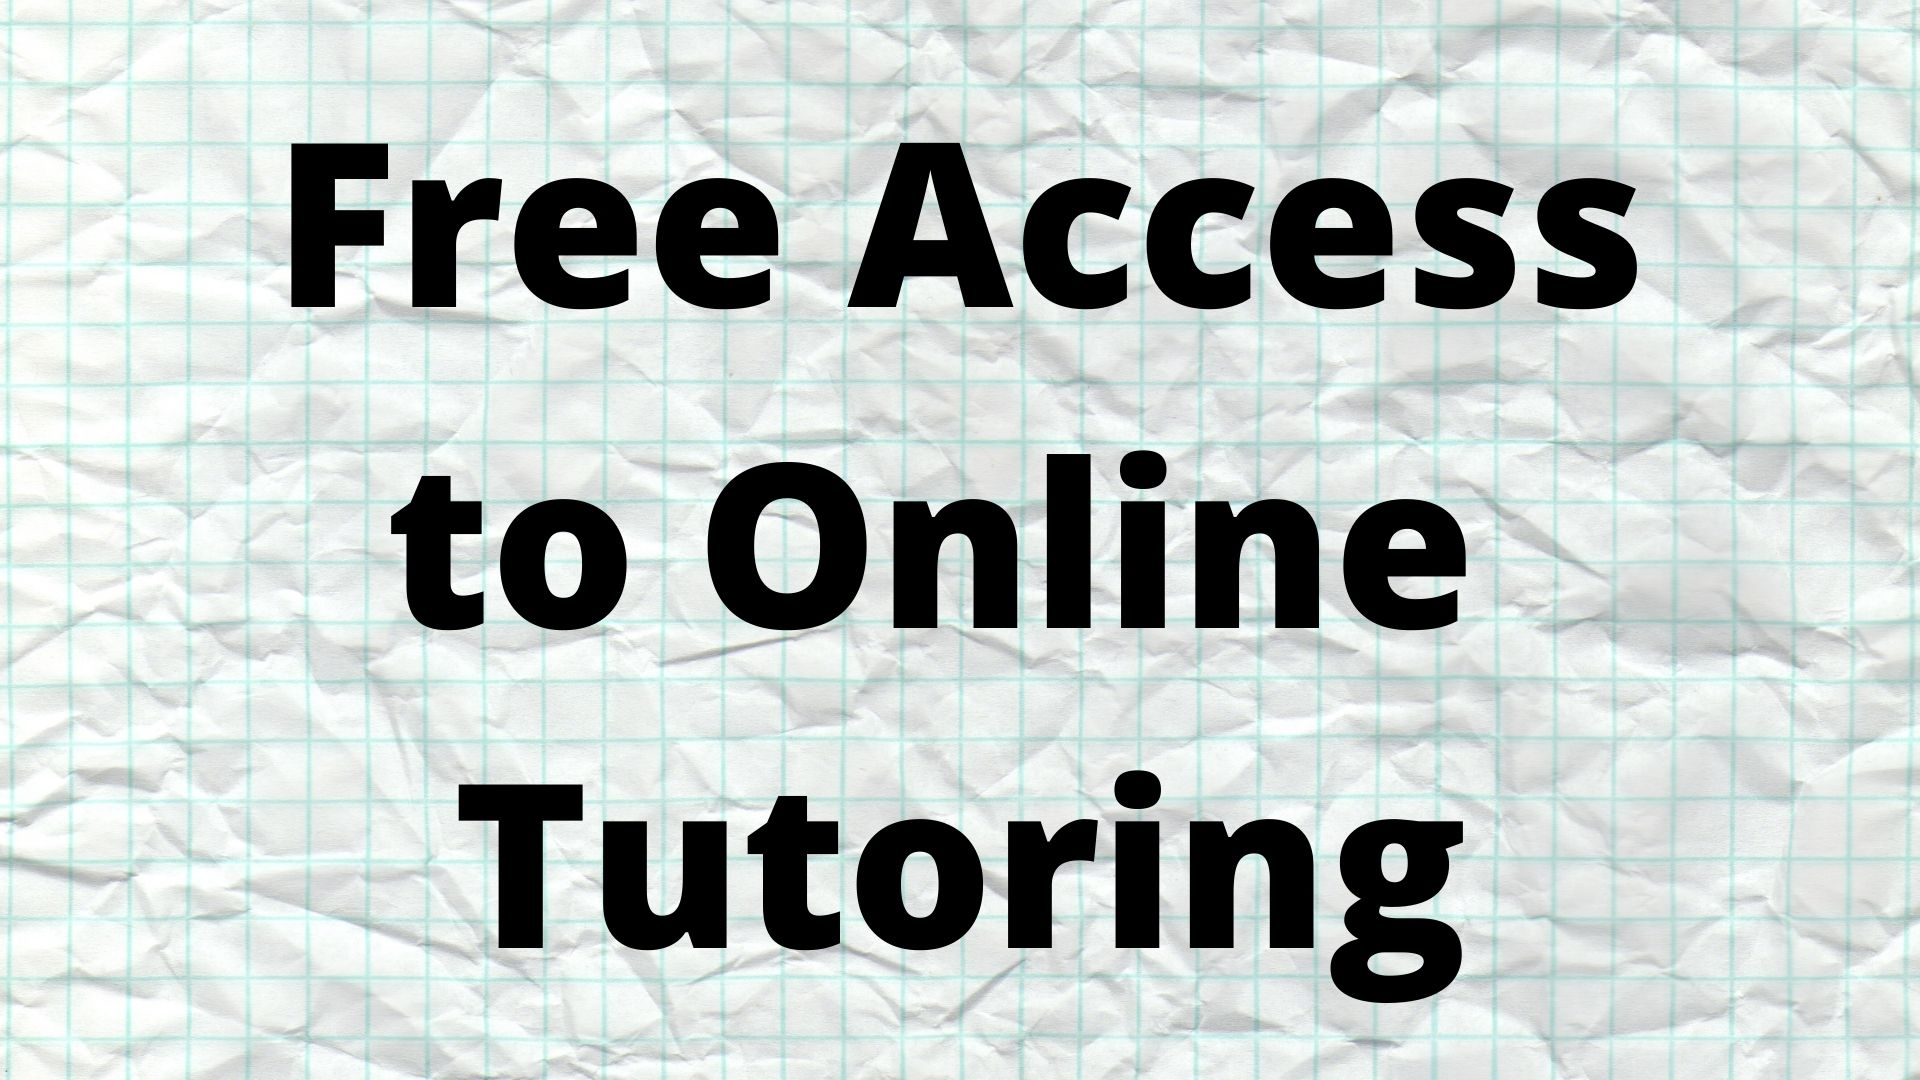 Free Access to Online Tutoring